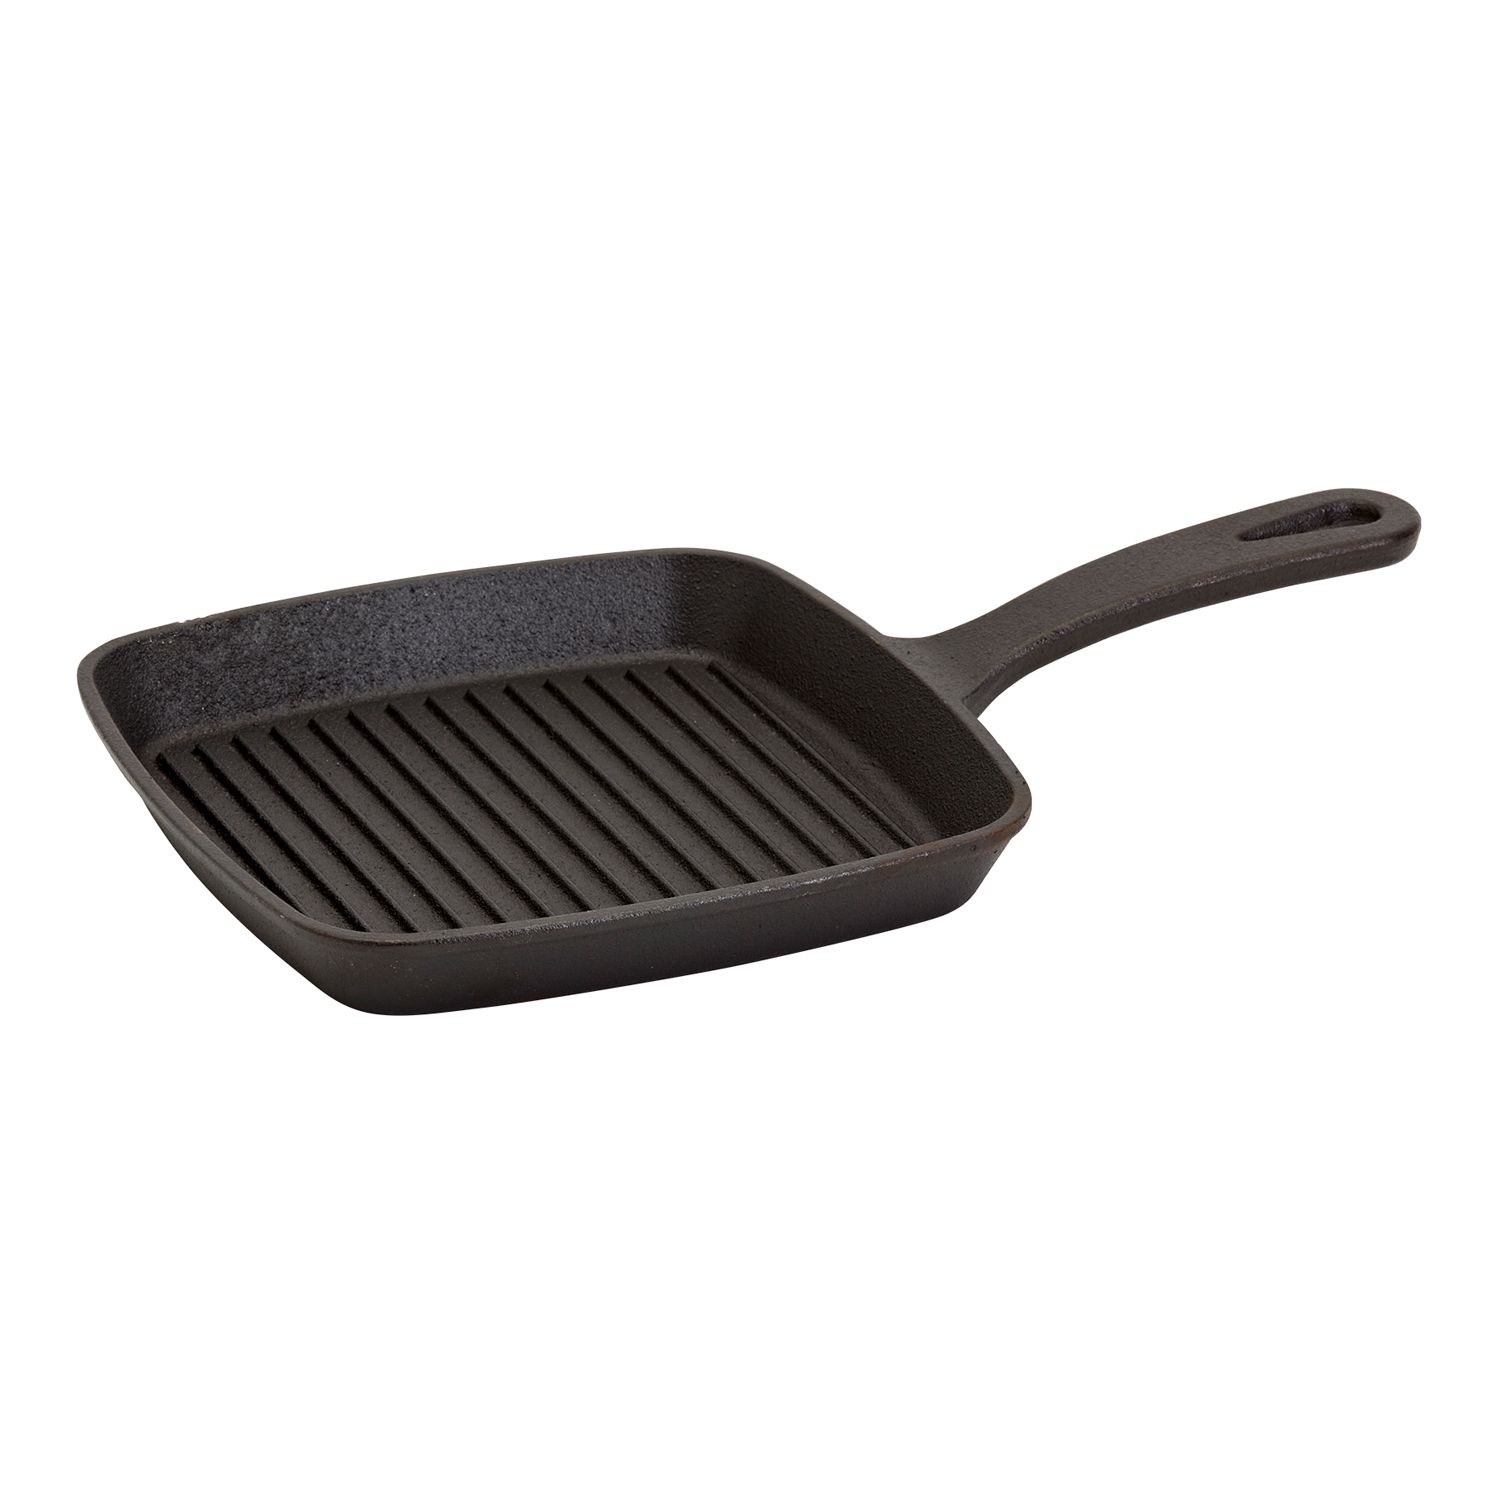 NutriChef 18 Cast Iron Skillet Reversible Grill Plate Pan for Stove Top,  Black 